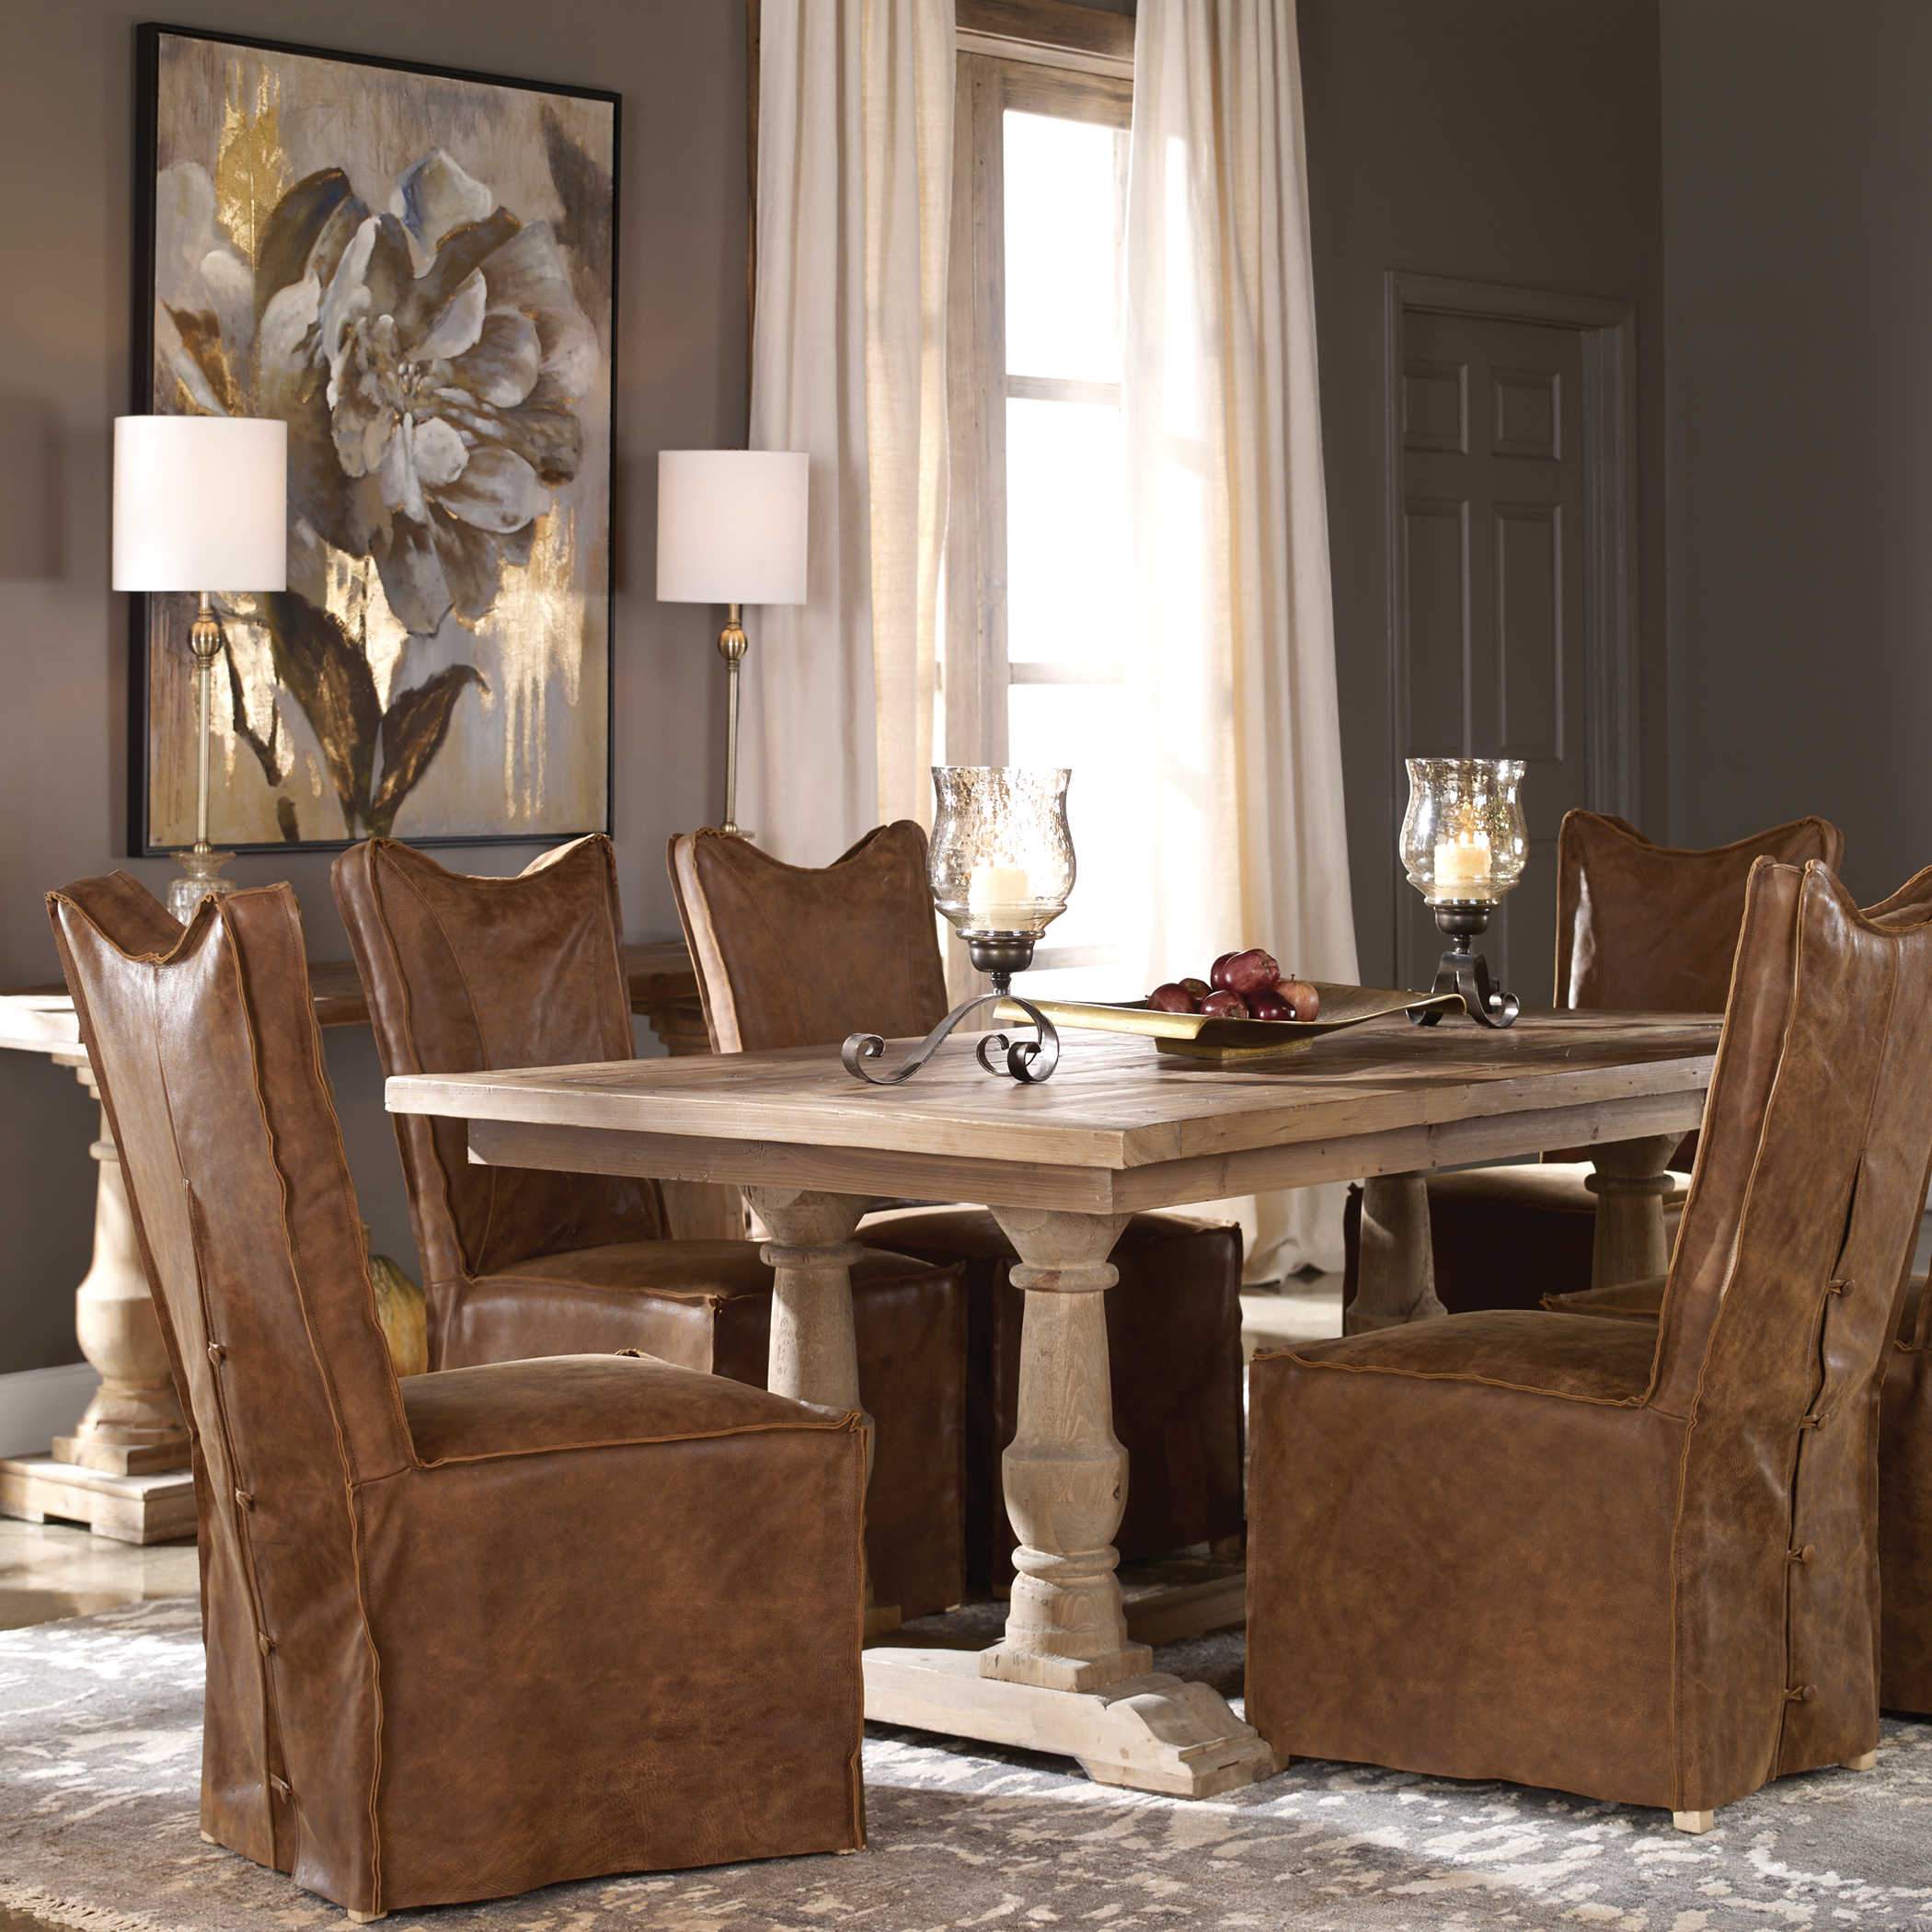 Uttermost Home Motor Freight - Rate to be Quoted Uttermost Stratford Dining Table